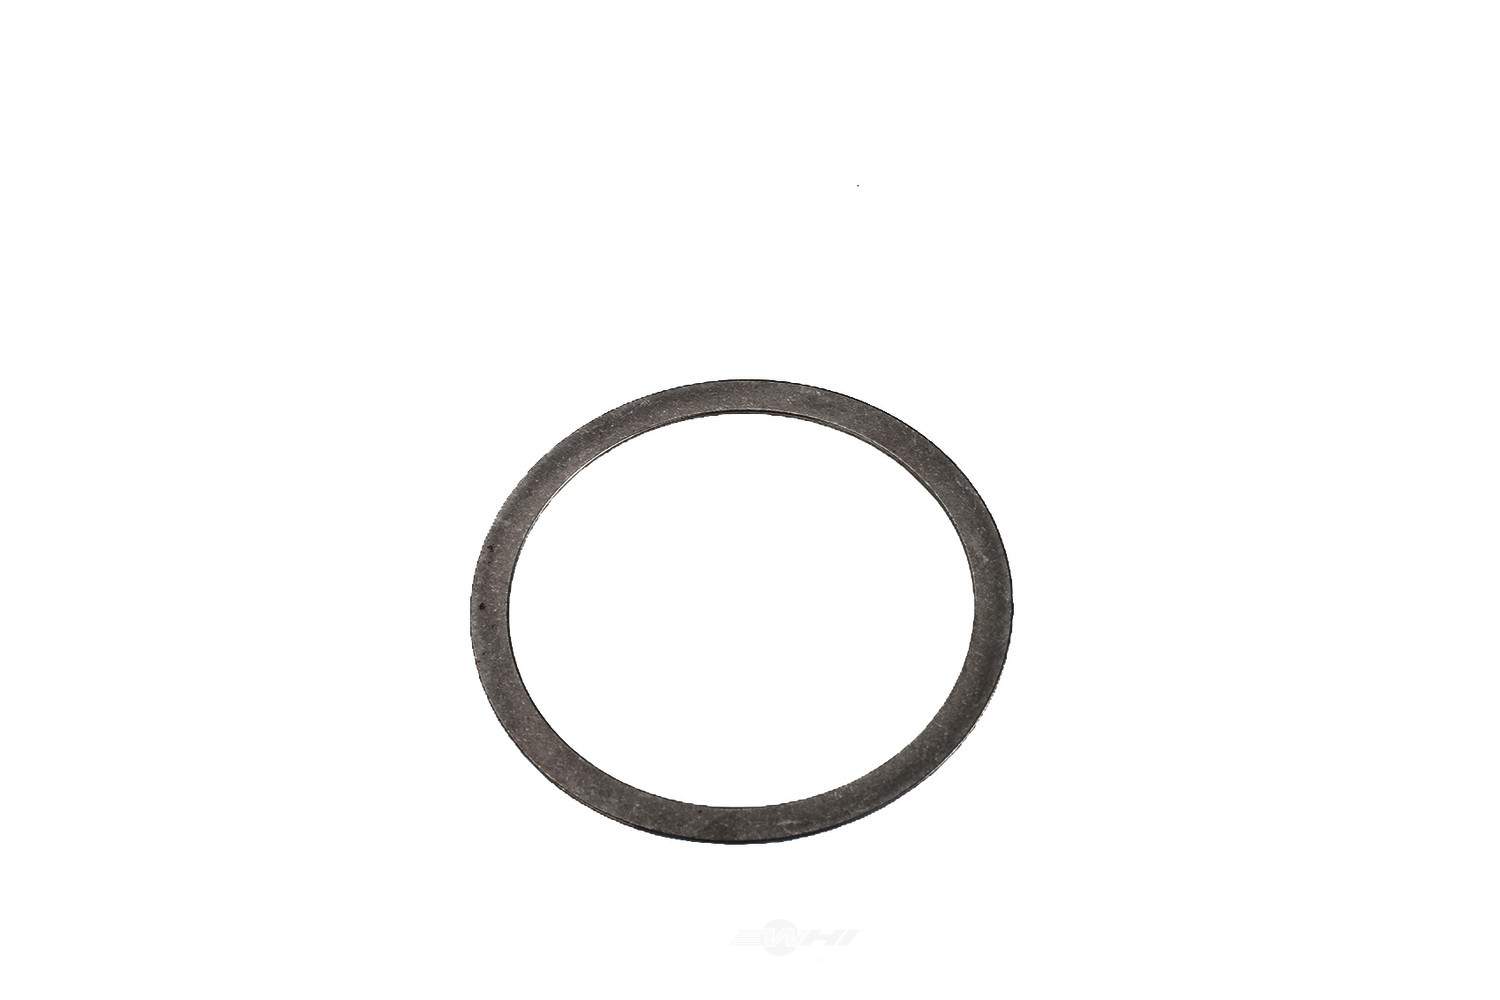 GM GENUINE PARTS - Differential Pinion Bearing Washer - GMP 24234088